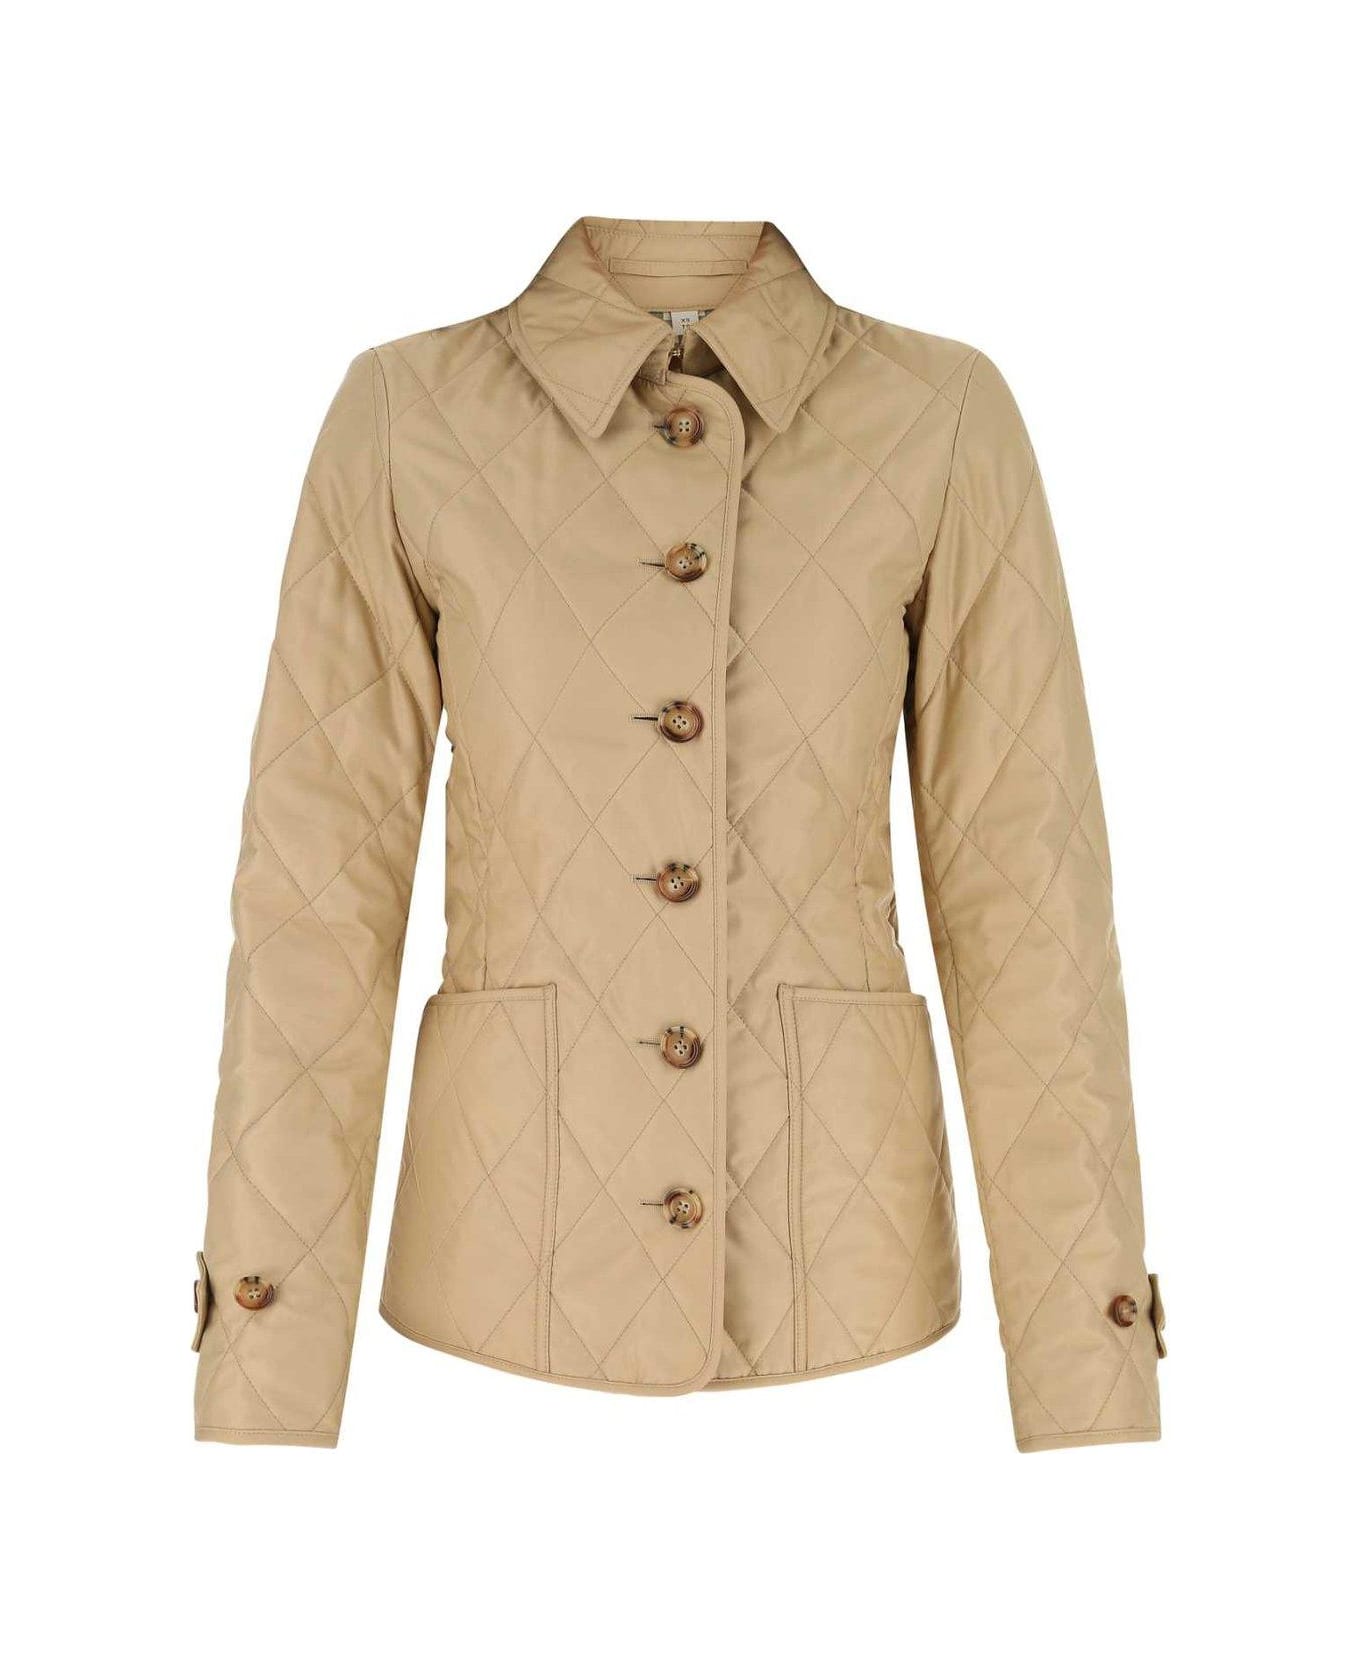 Burberry Quilted Thermoregulated Jacket - NEUTRALS ジャケット